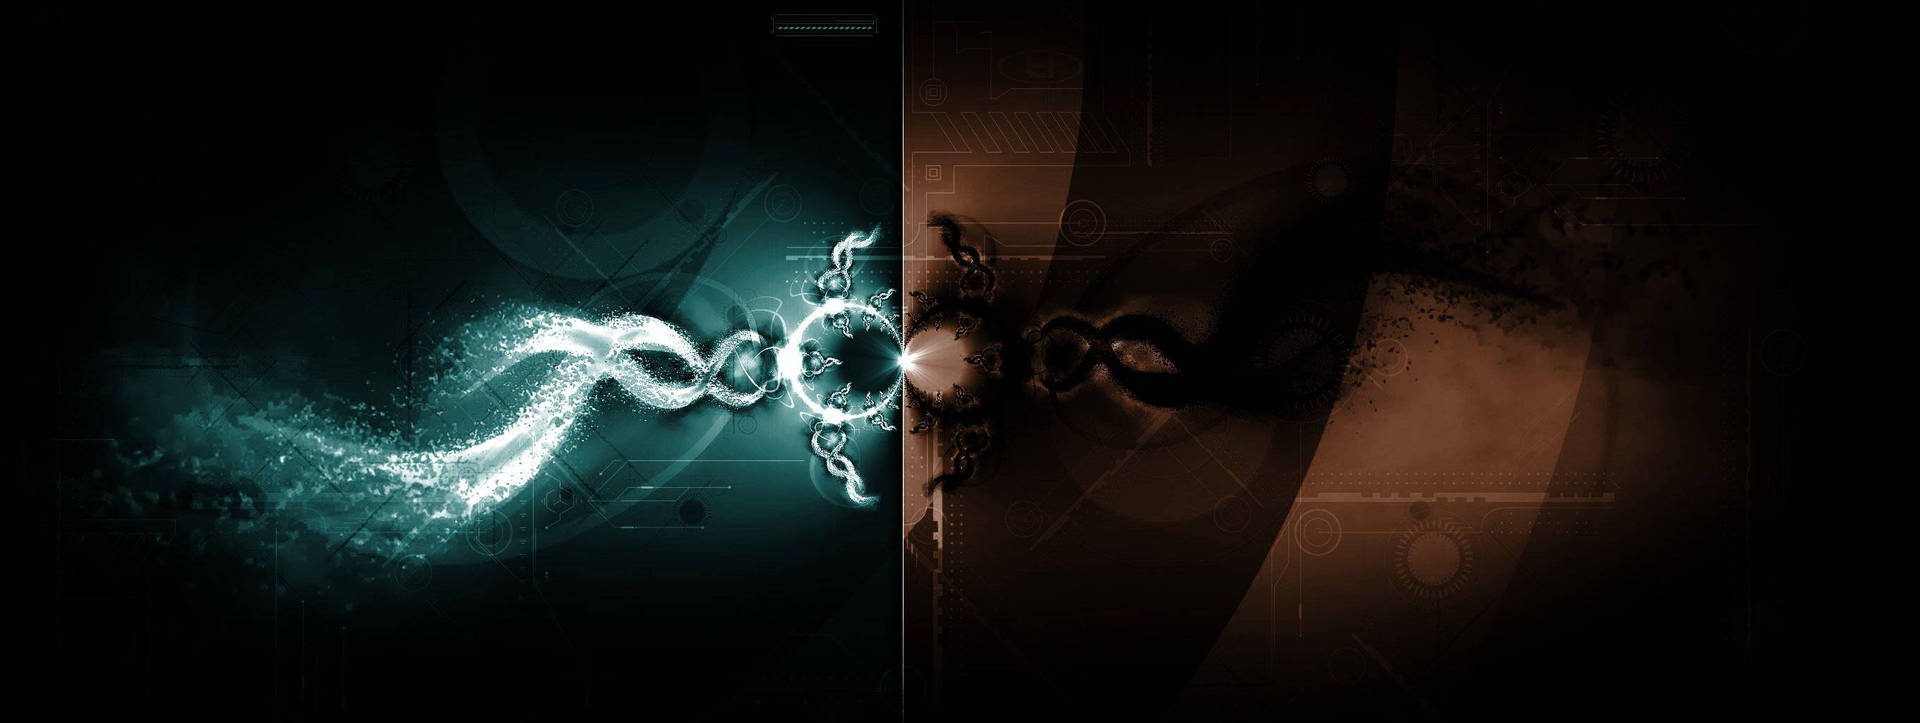 Get Ready For The Portal 2 Dual Screen Experience! Wallpaper